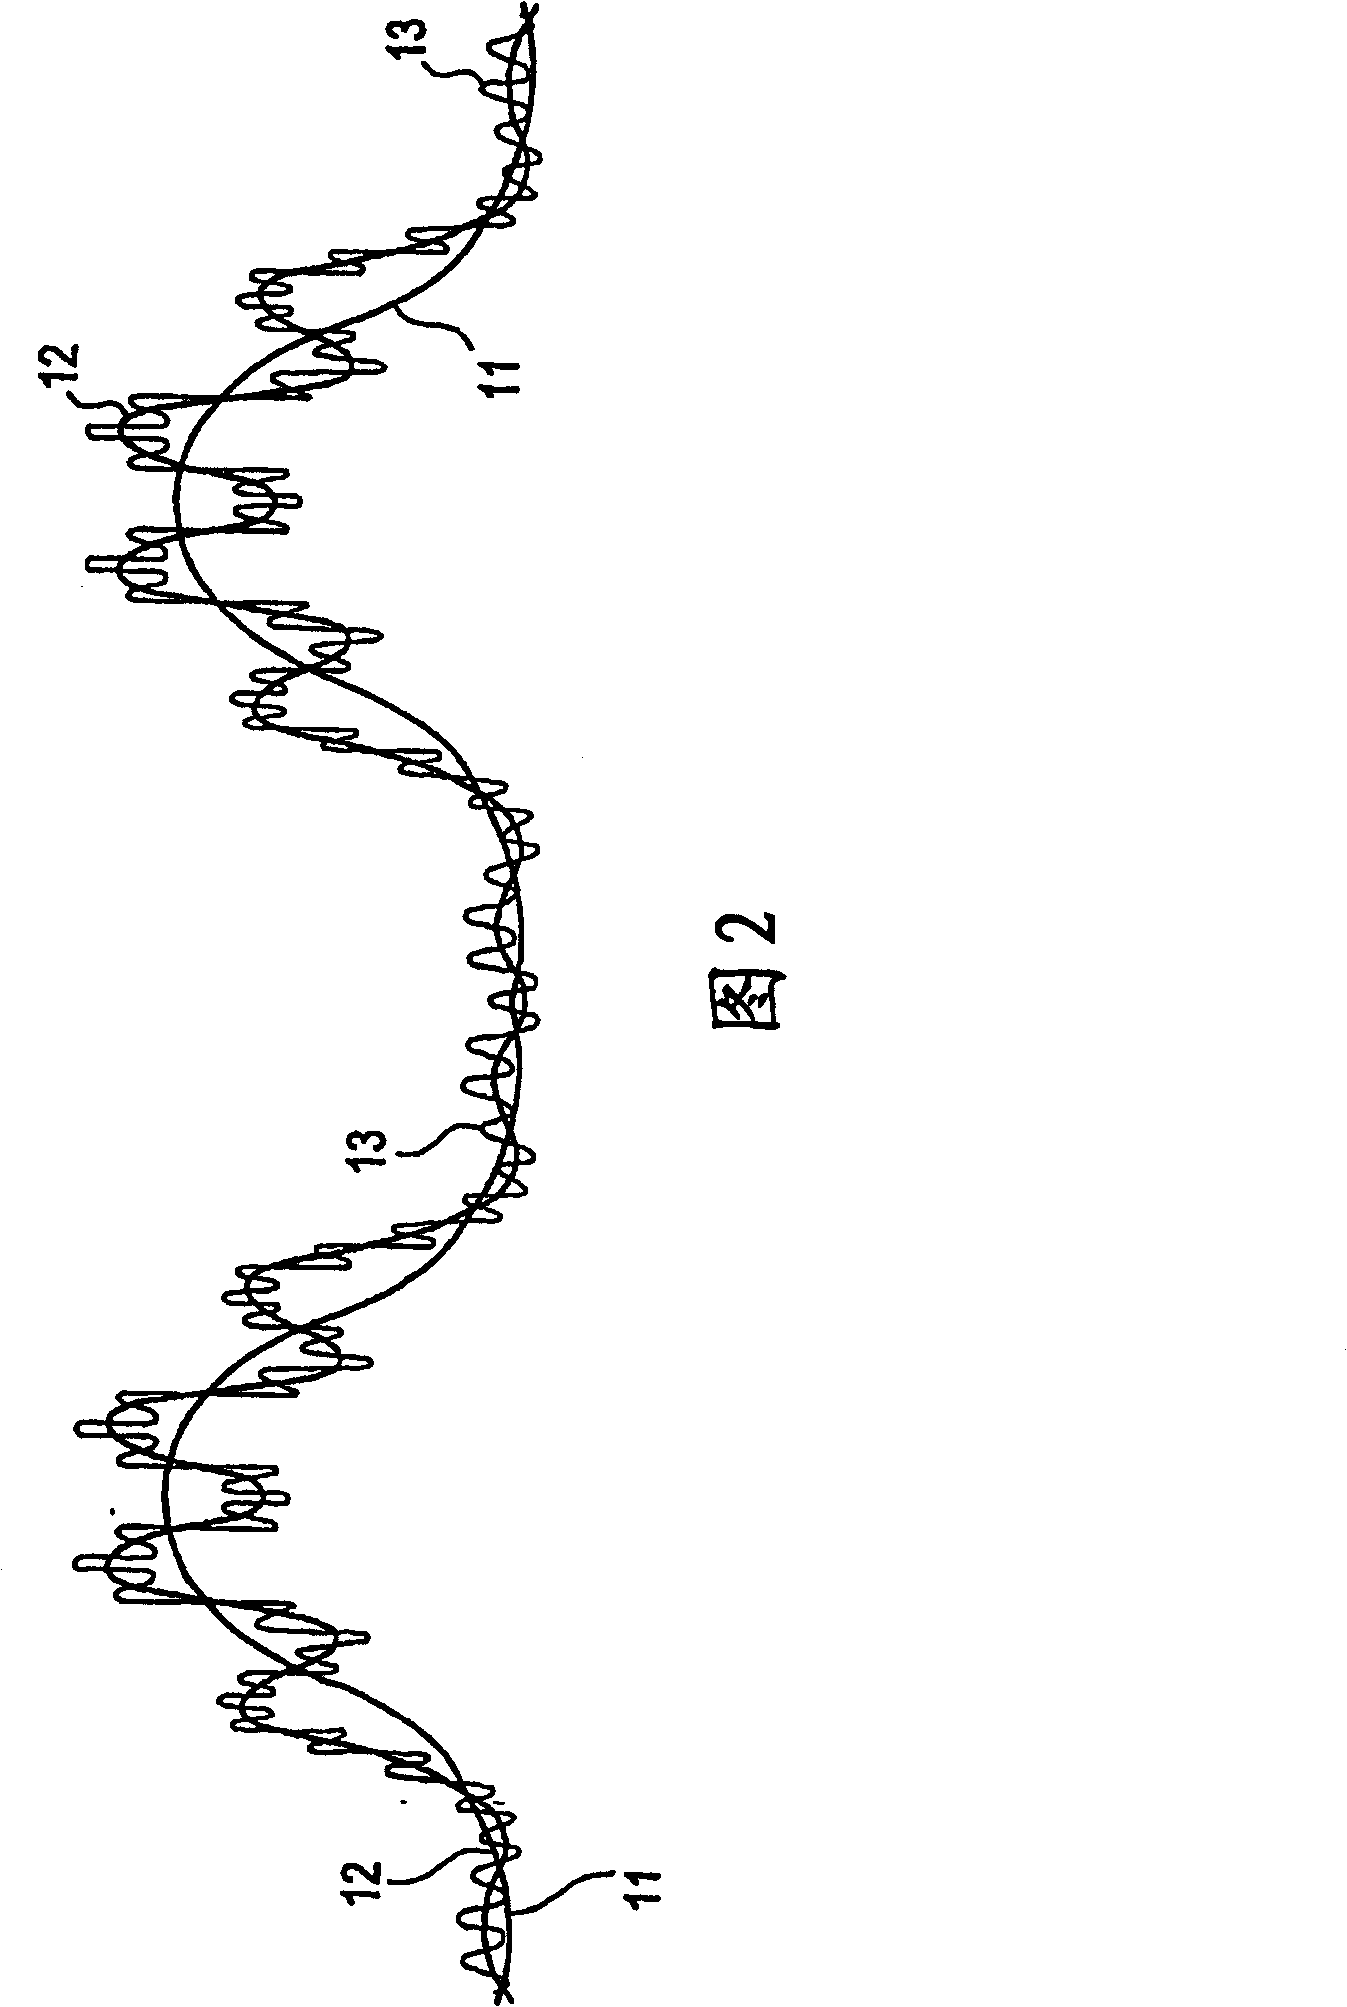 Systems and methods of electromagnetic influence on electroconducting continuum